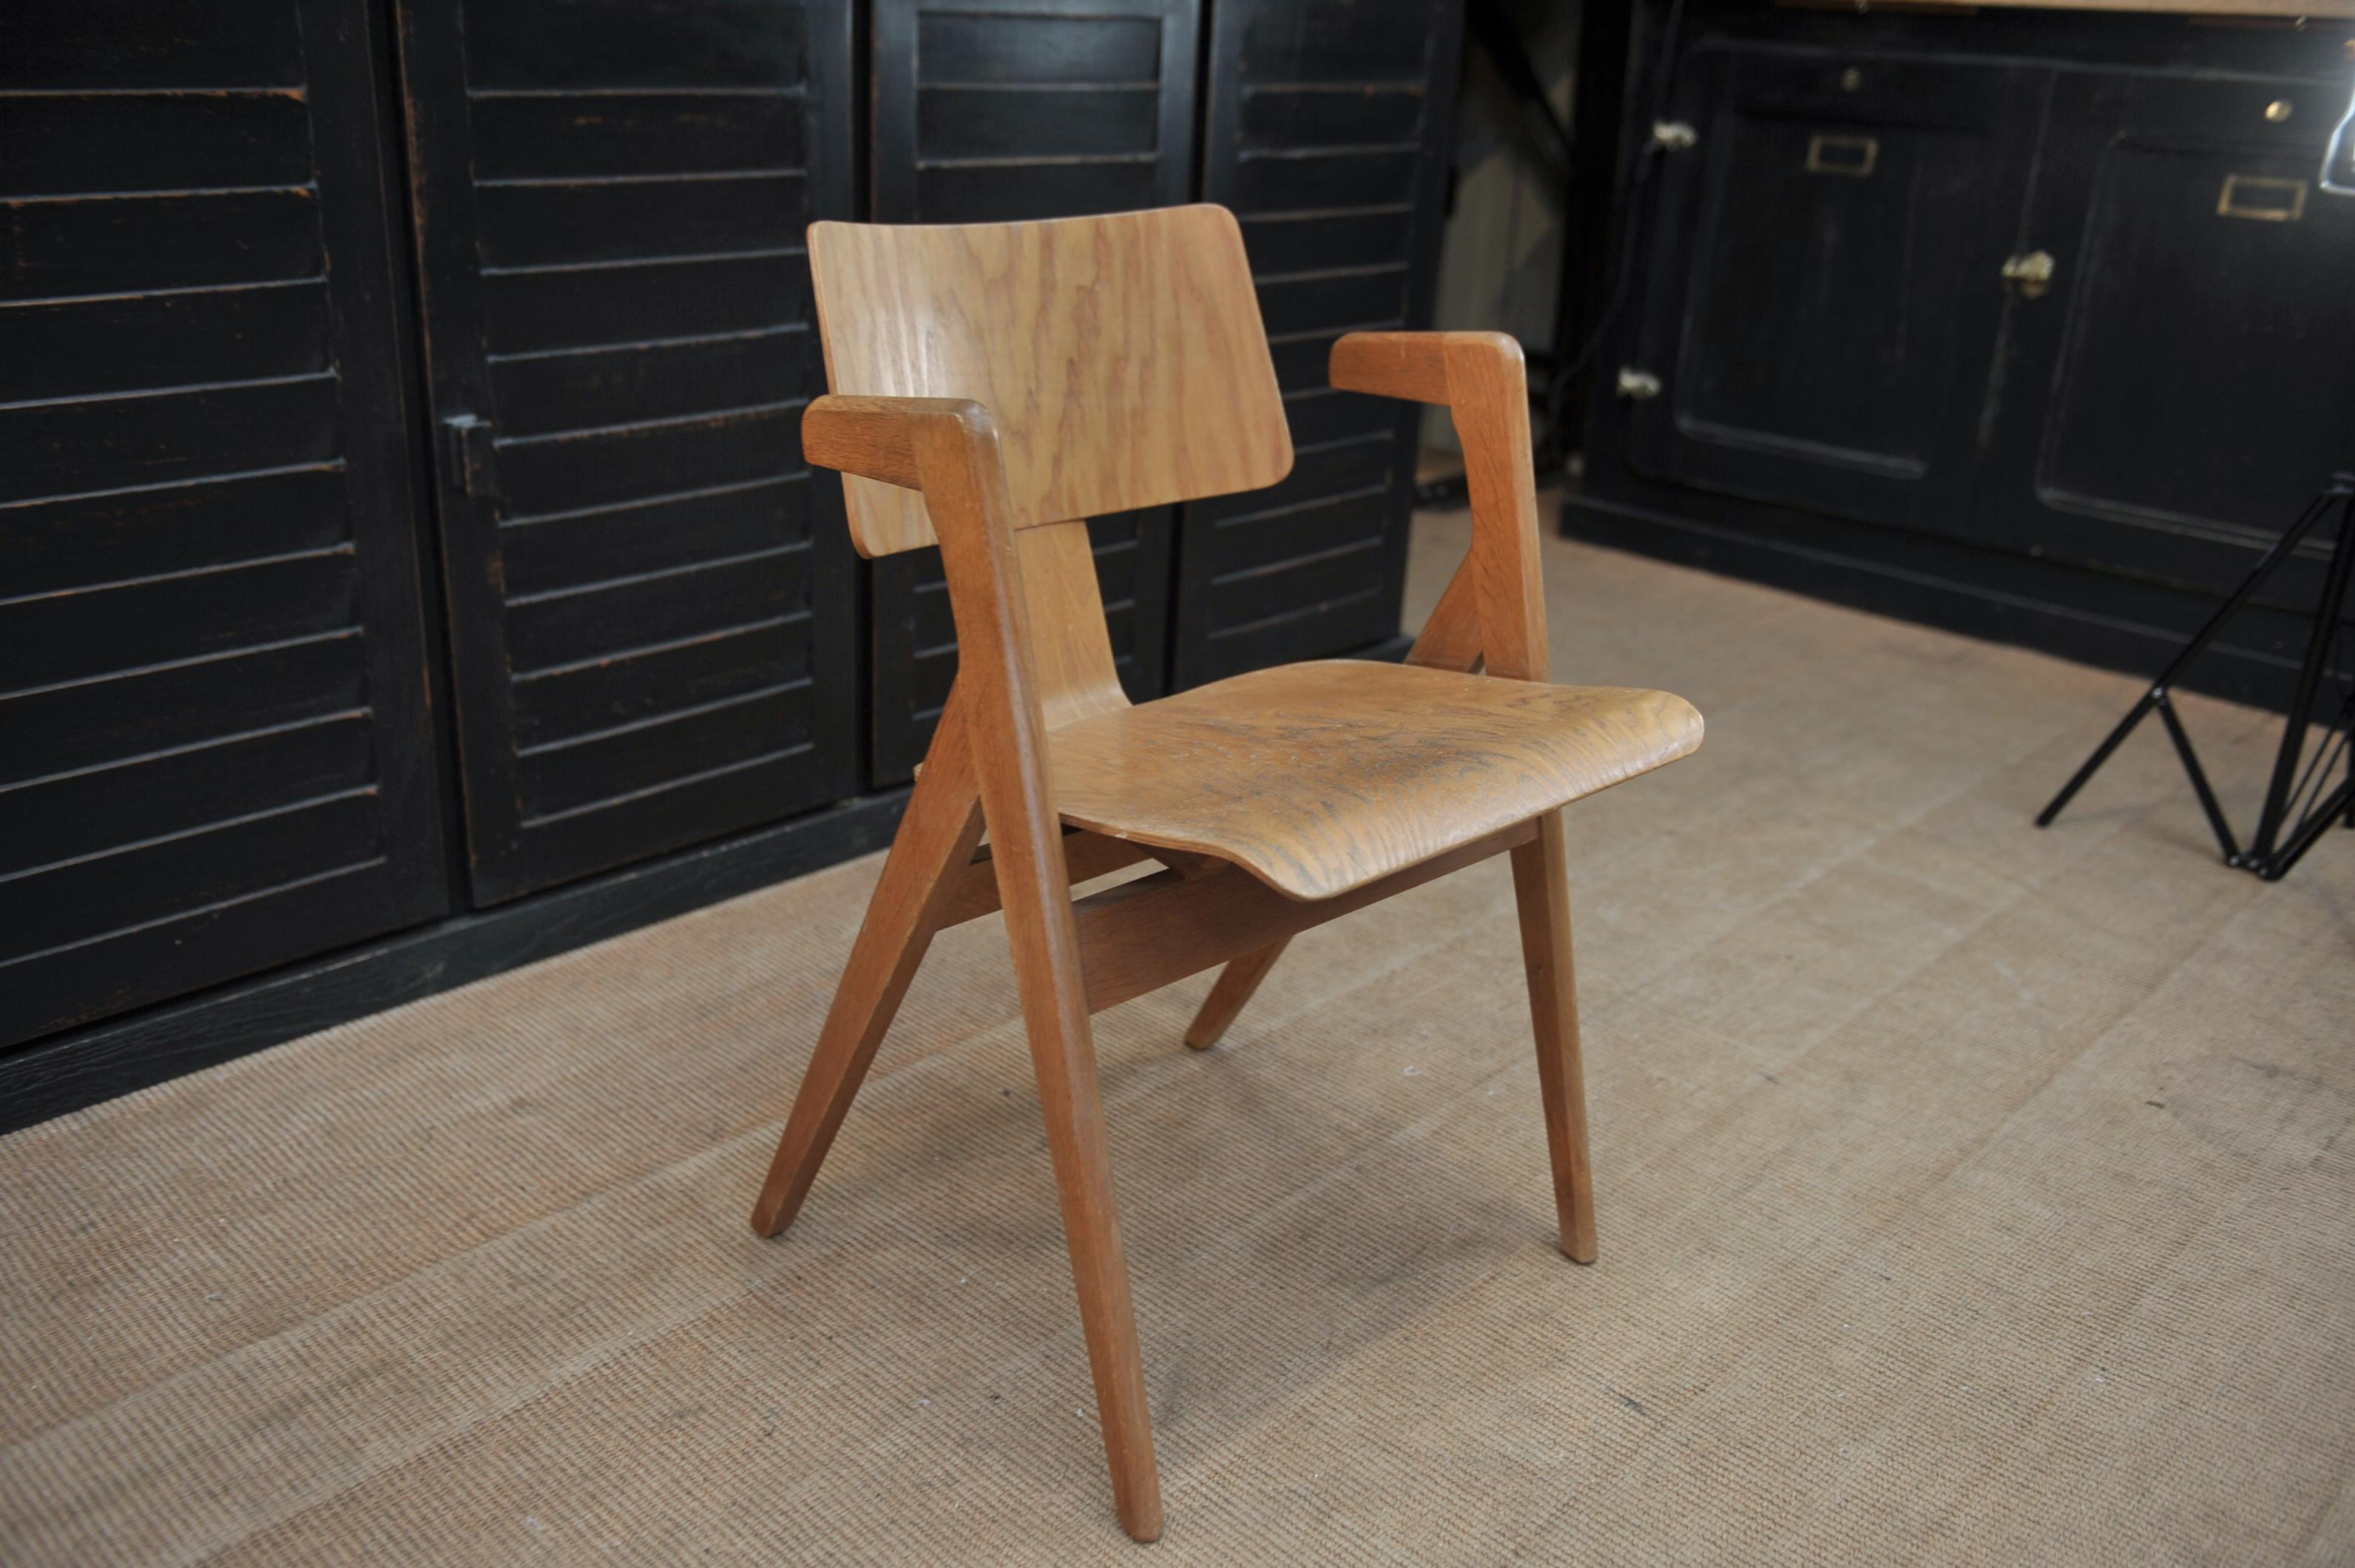 This armchair Model Hillestak was designed by the English Designer Robin Day in the 50s for the manufacturer Hillm. The stucture and supened armes are in solid oak. The seat and back made in curved ash tree veneer. Very stable and good condition. No